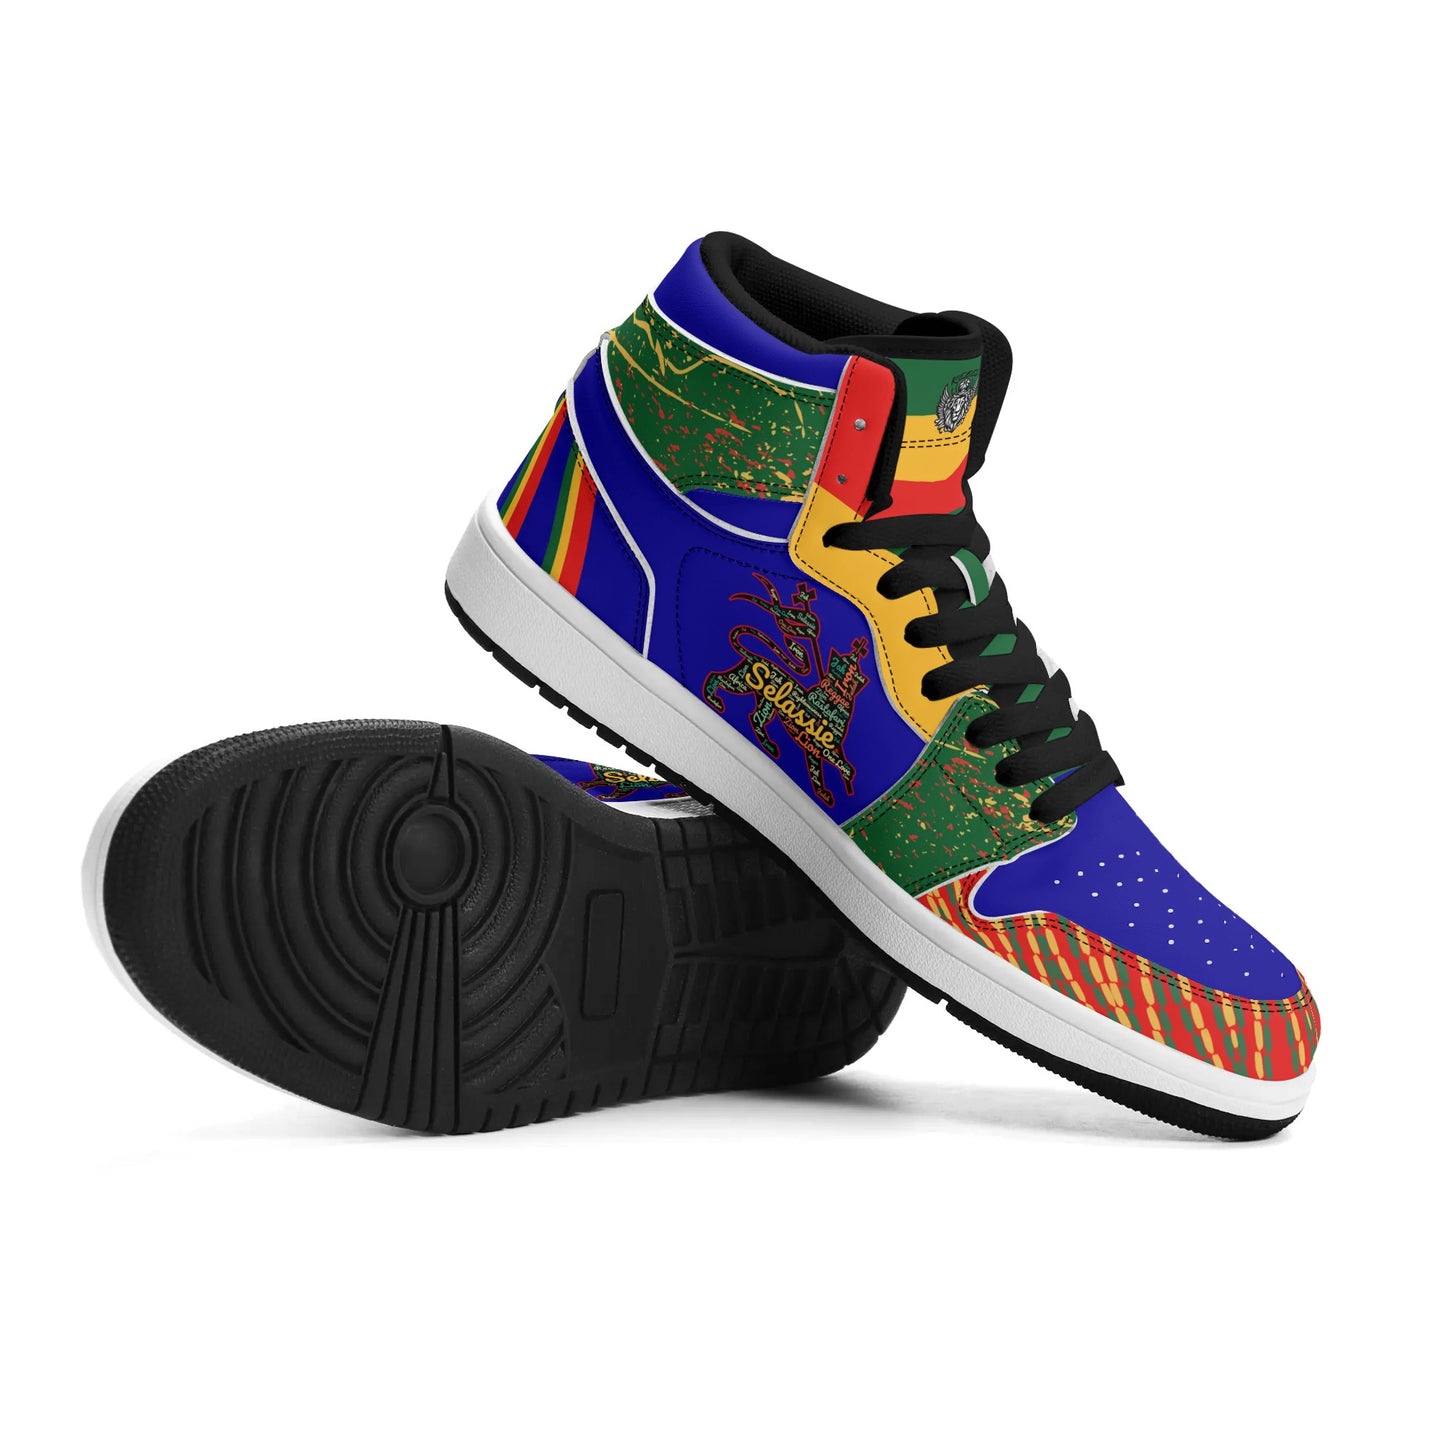 Rasta Mens Shoes, Womens Rasta Shoes, Jamaican Colors Shoes on a white background as a product image.